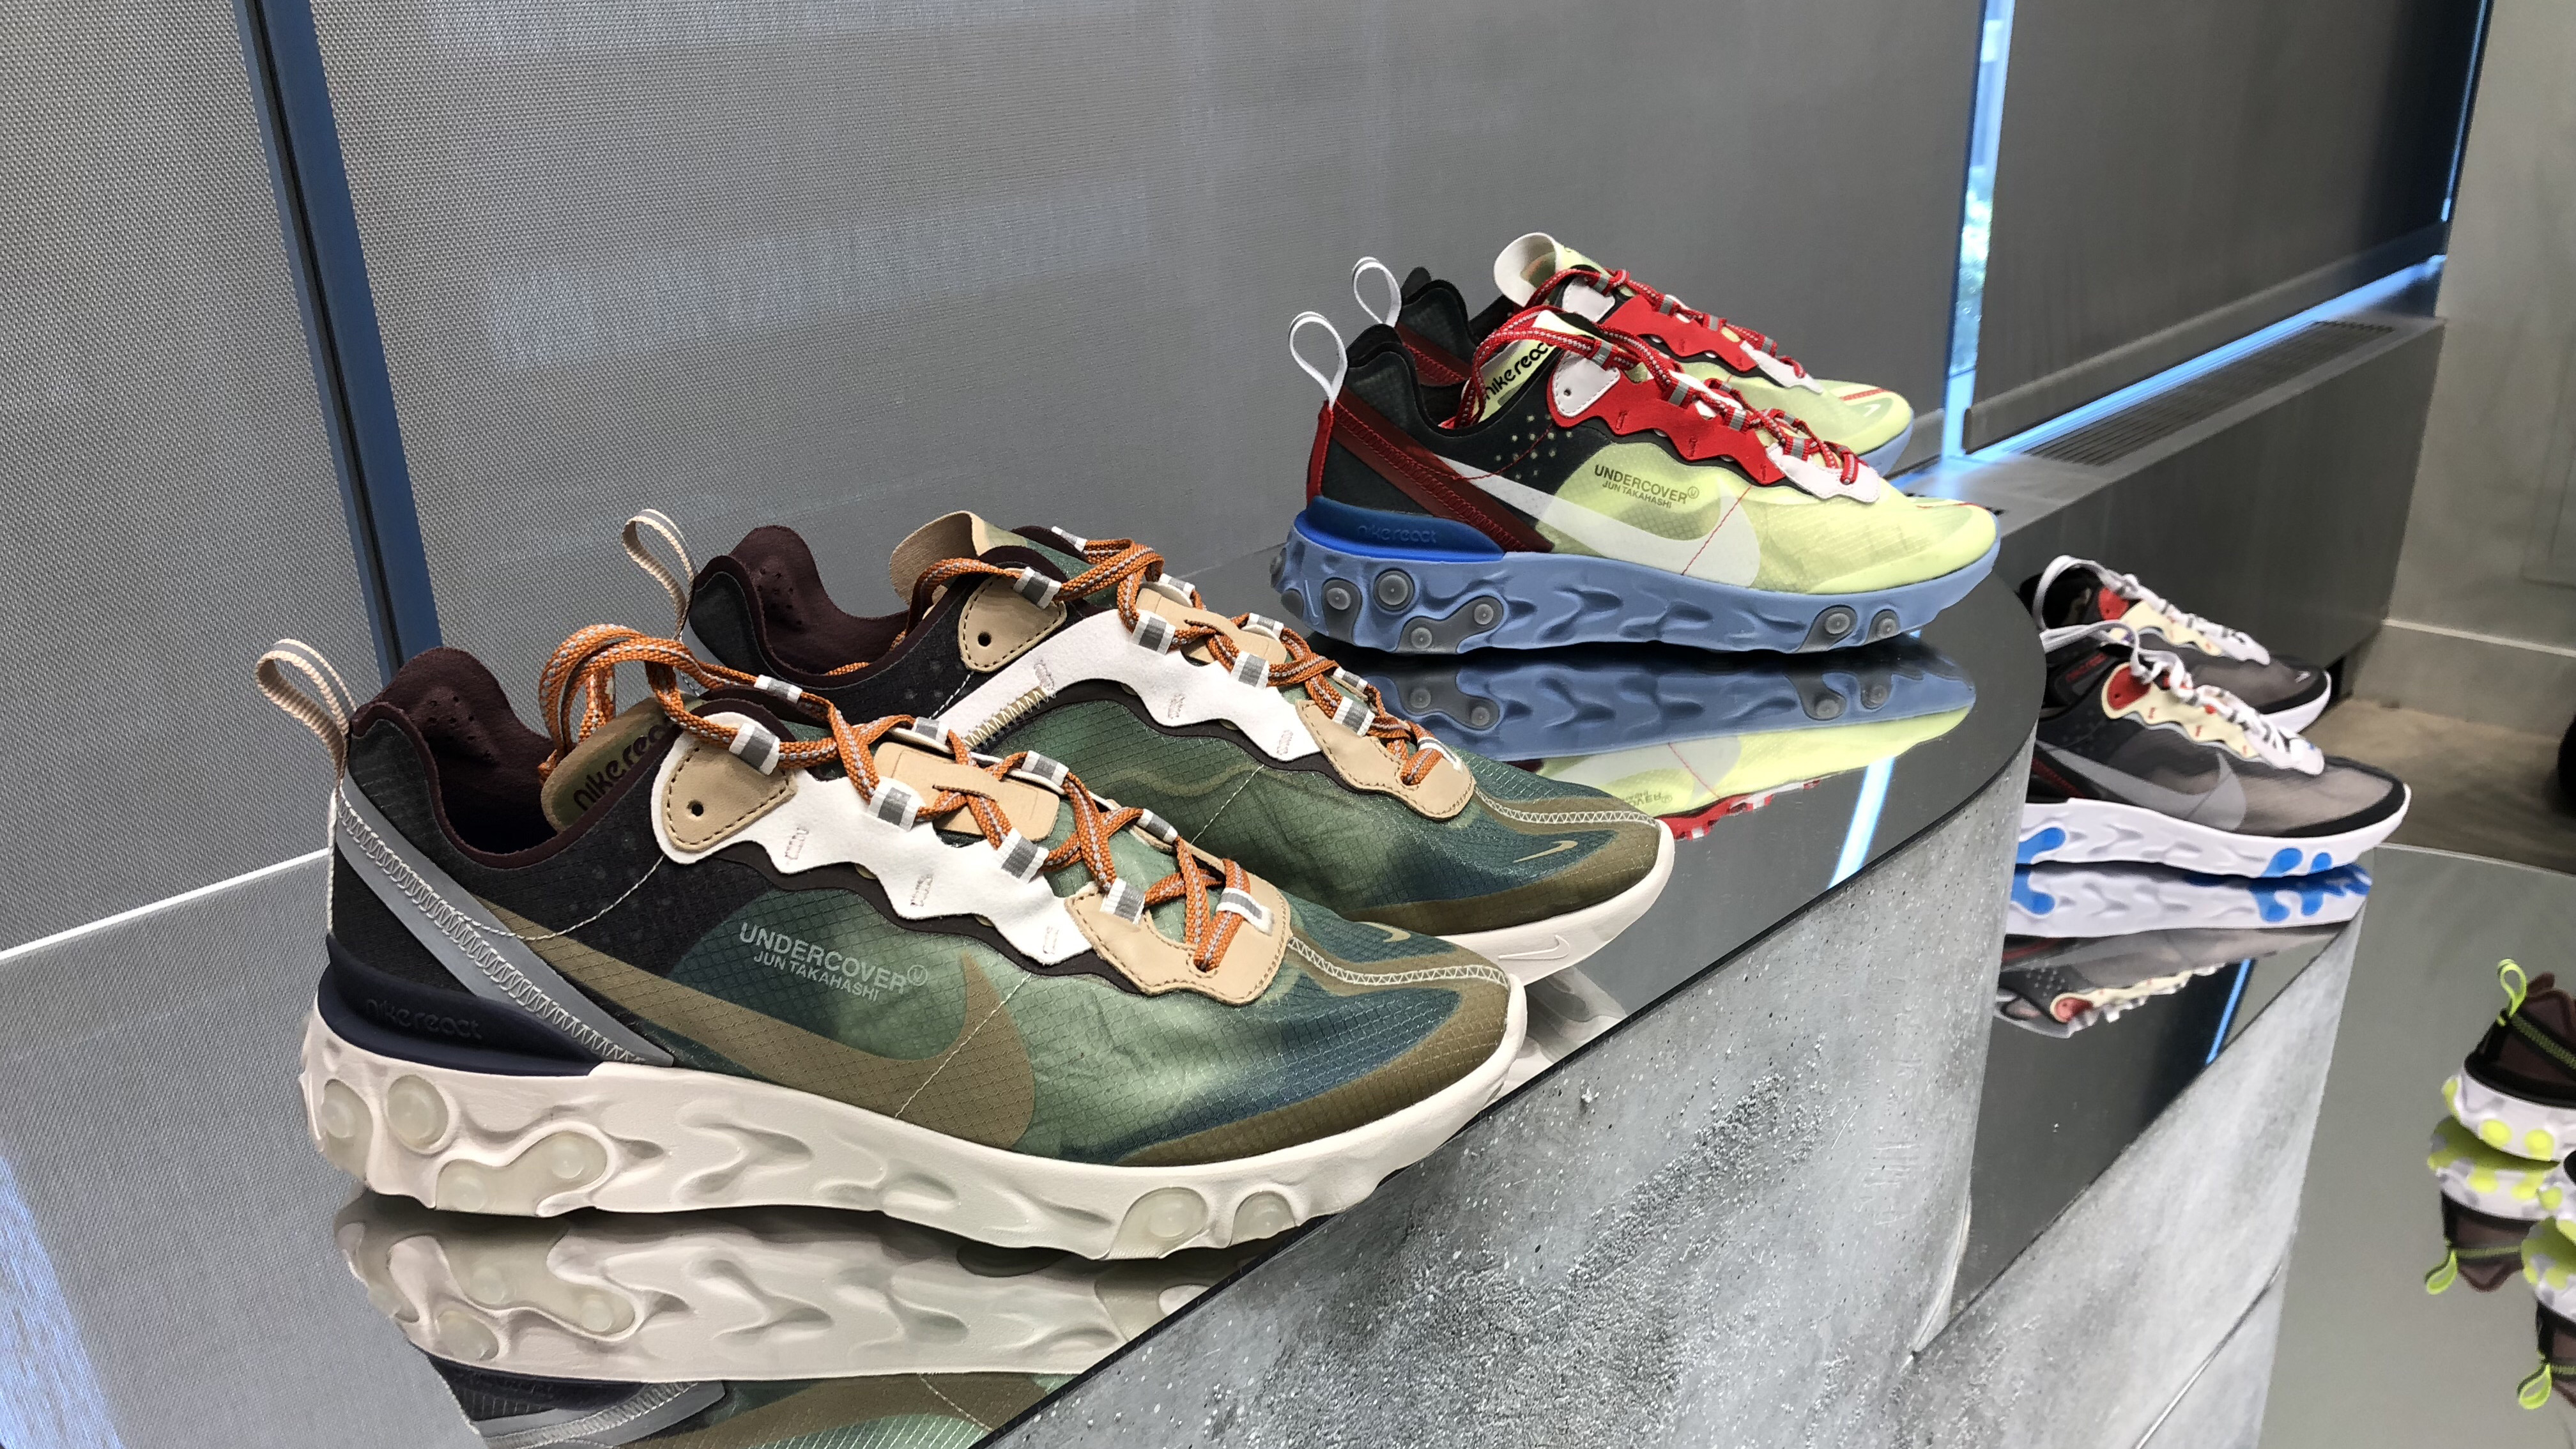 A Closer Look at Two More Pairs of Undercover's React Element 87s